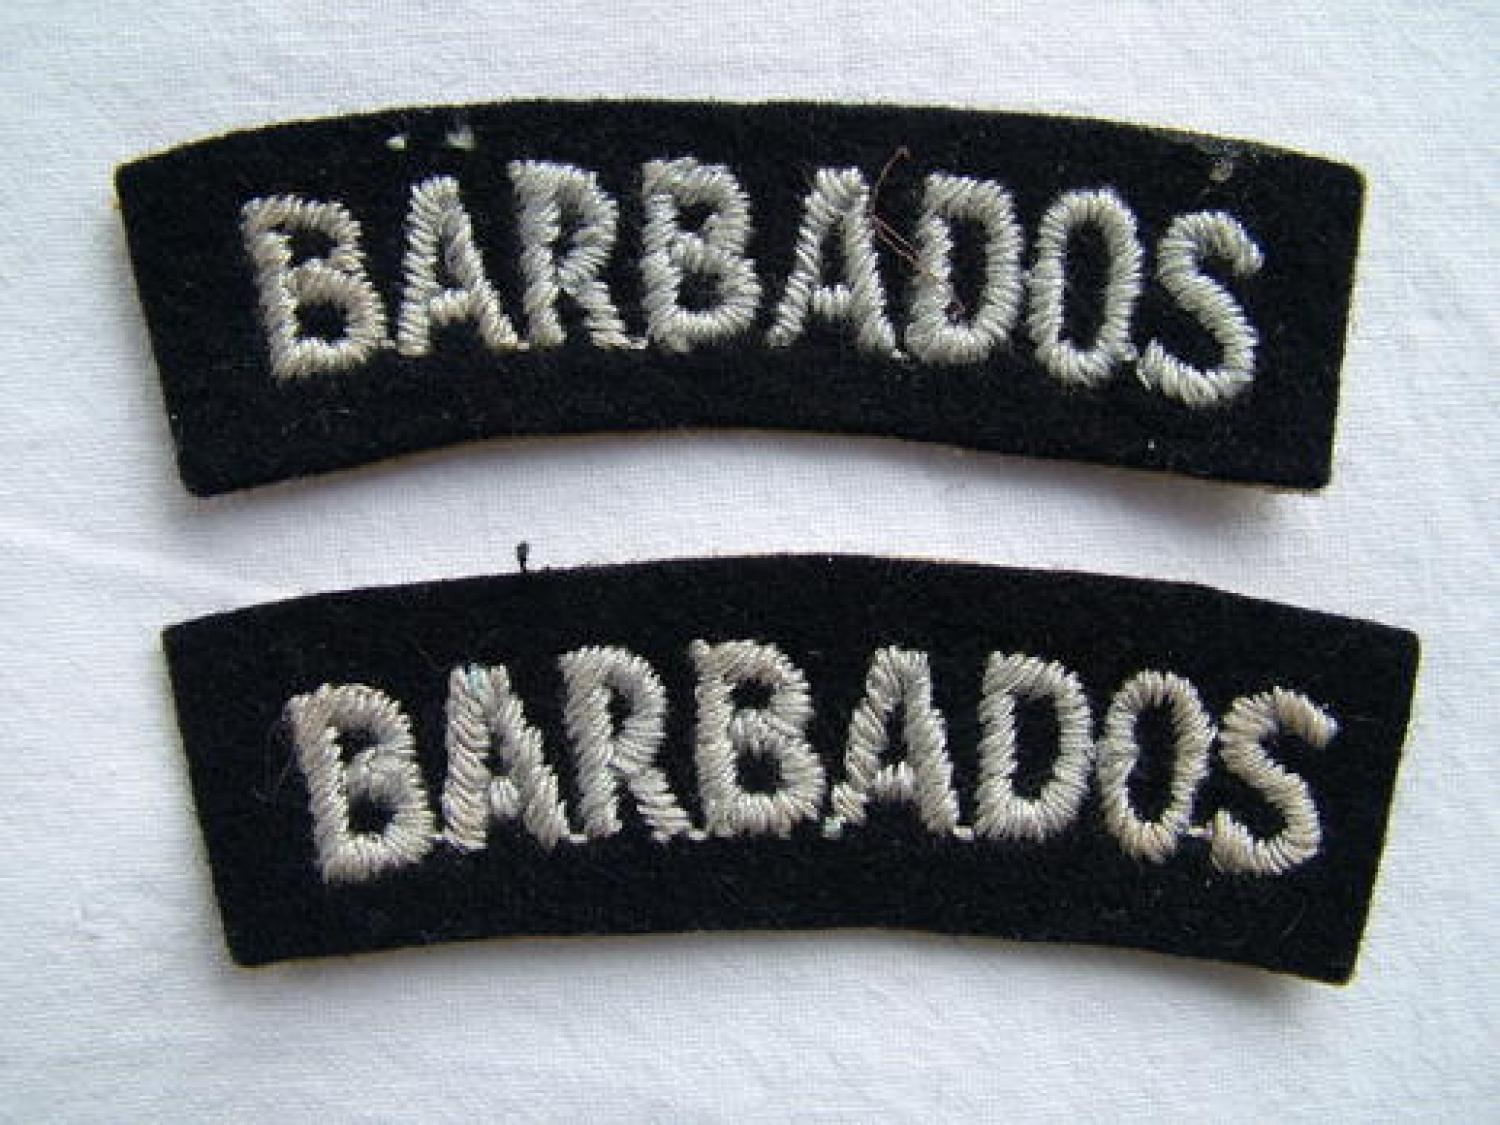 R.A.F. 'Barbados' Nationality Titles